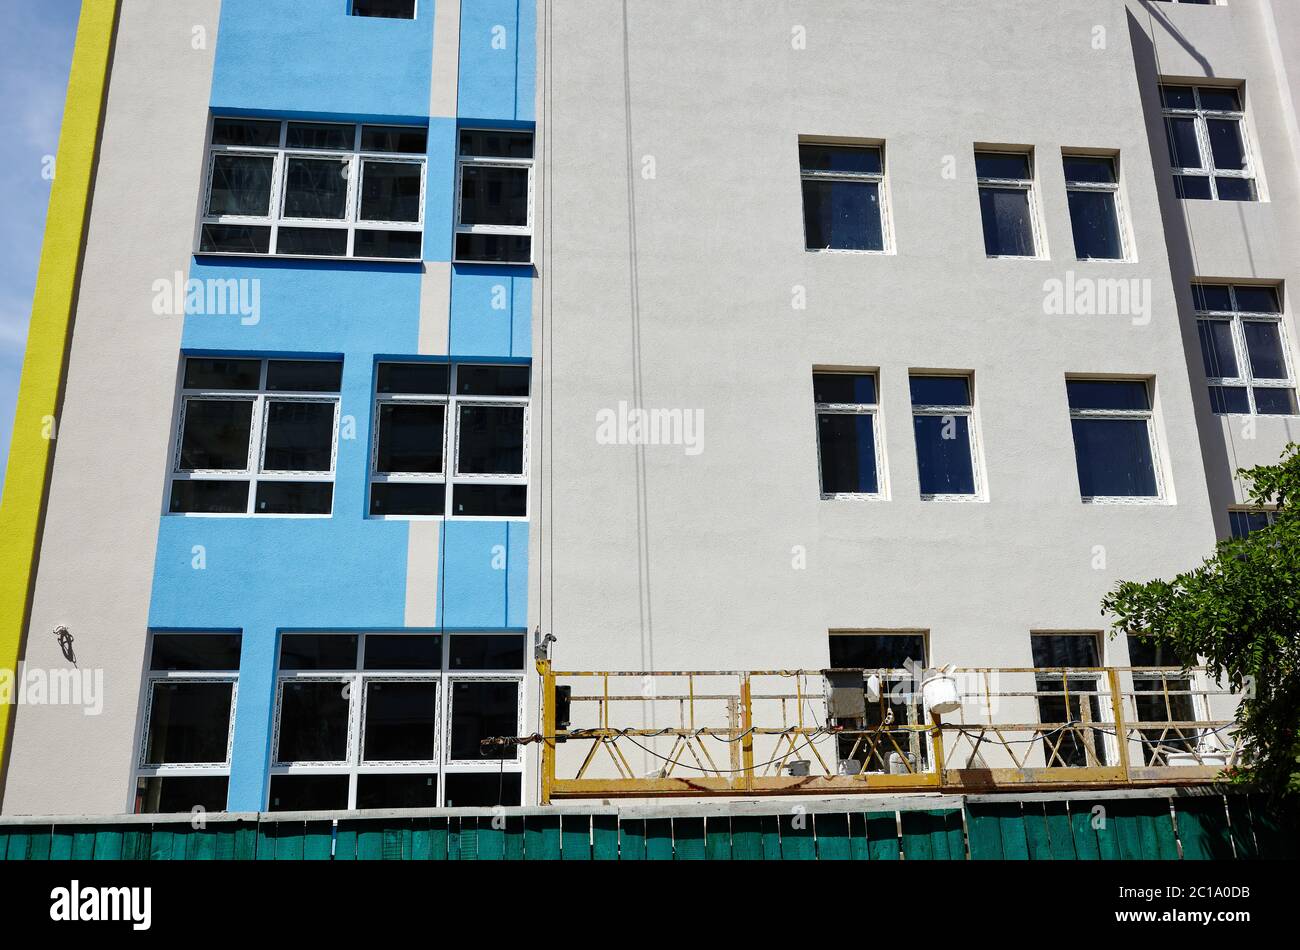 The progress of construction of the kindergarten building.Hanging scaffolding platform or window cleaning cradle system at construction site Stock Photo